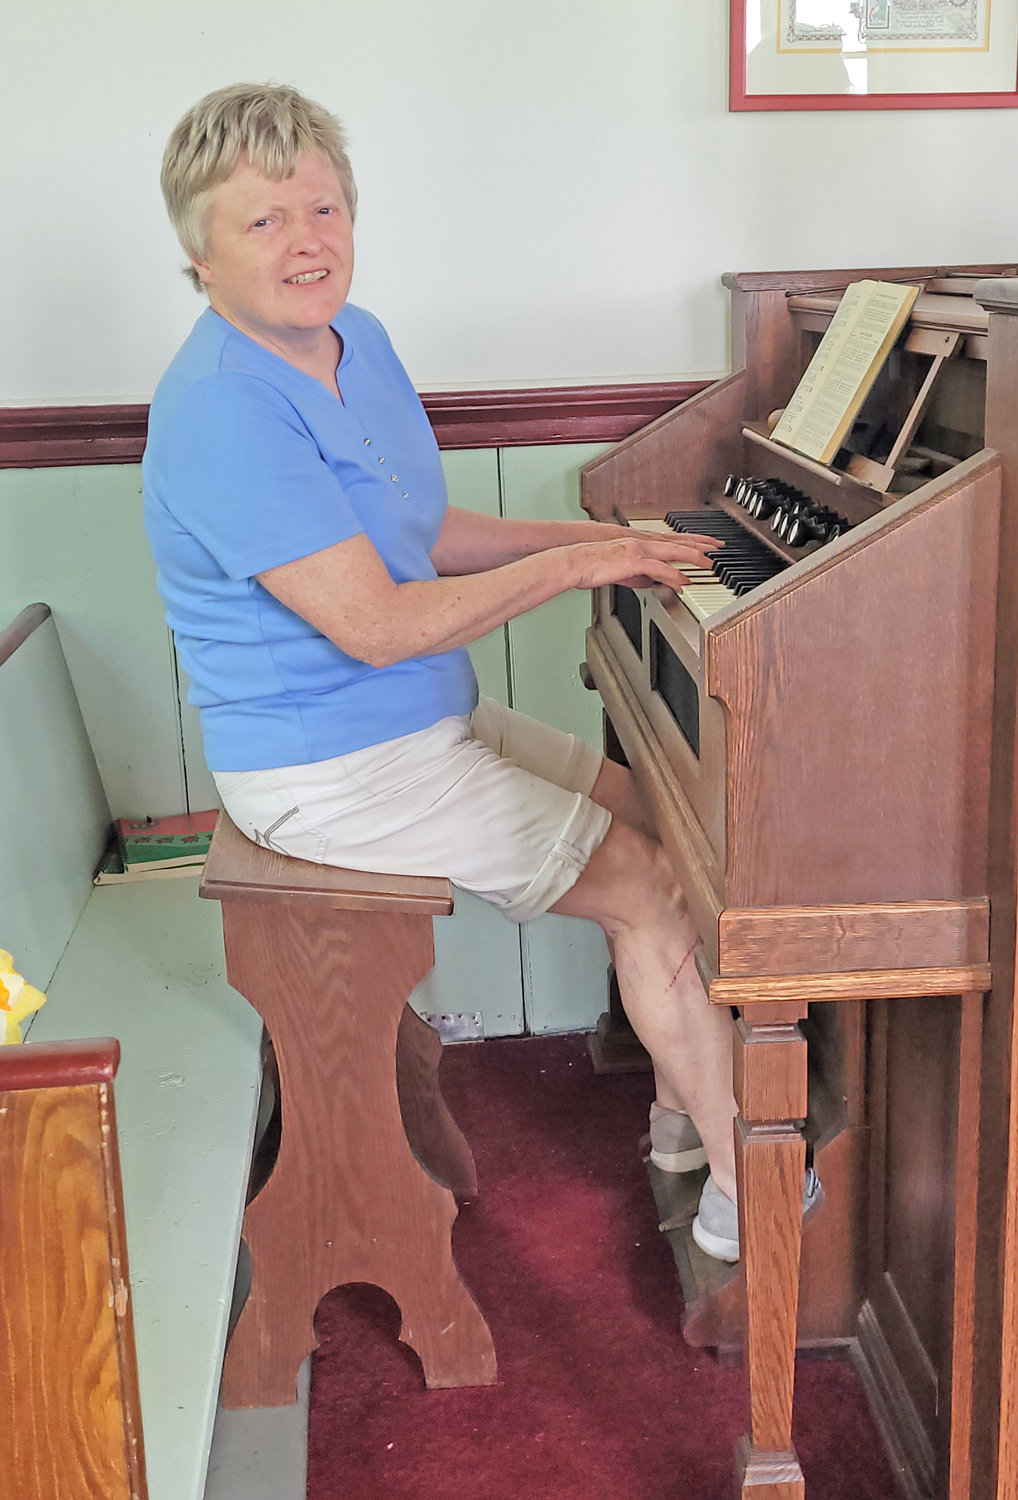 Shirley Jones Tolbert, whose lineage can be traced back to the early Welsh settlers and whose family attended Enlli for many years, played the organ at the open house.